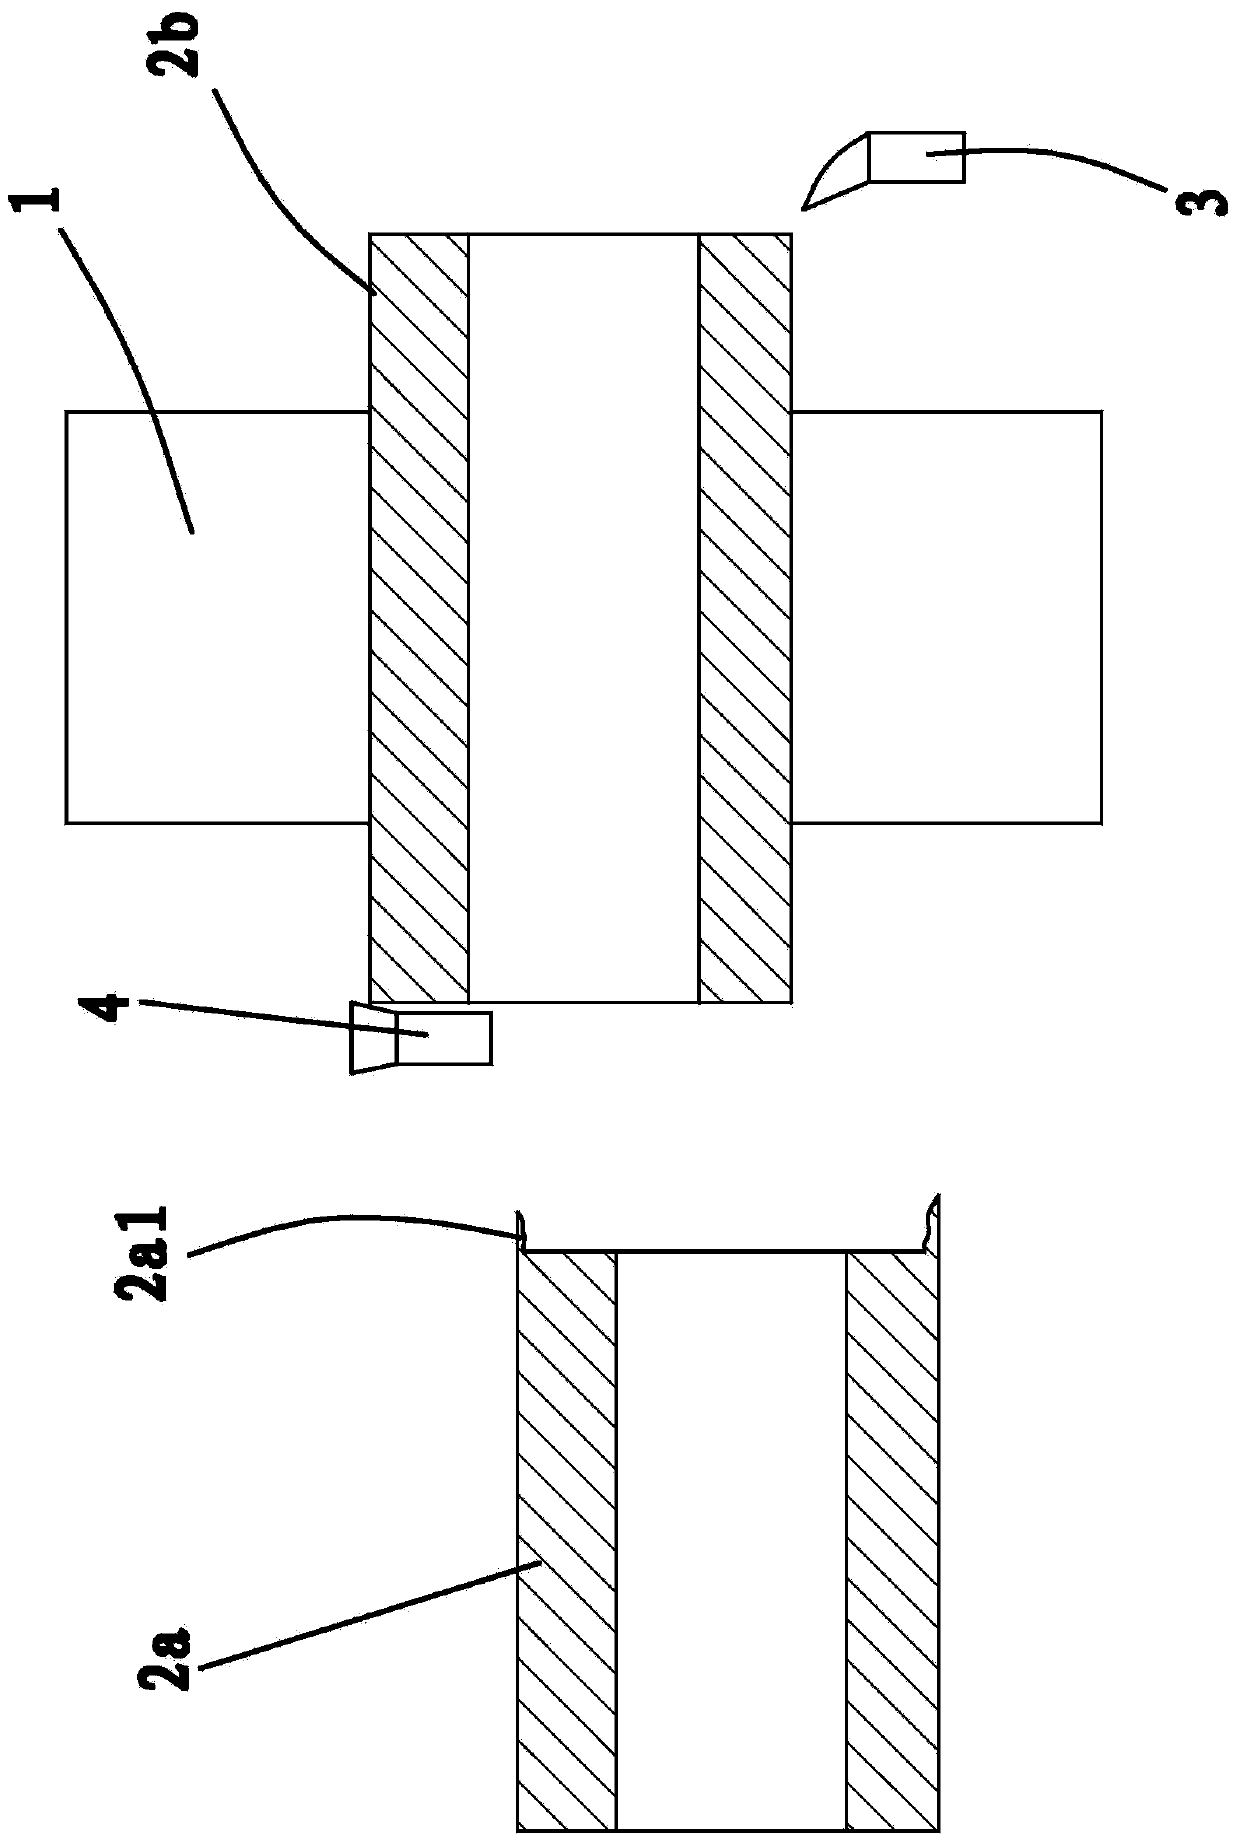 Turning cutting off method for rod-shaped workpieces